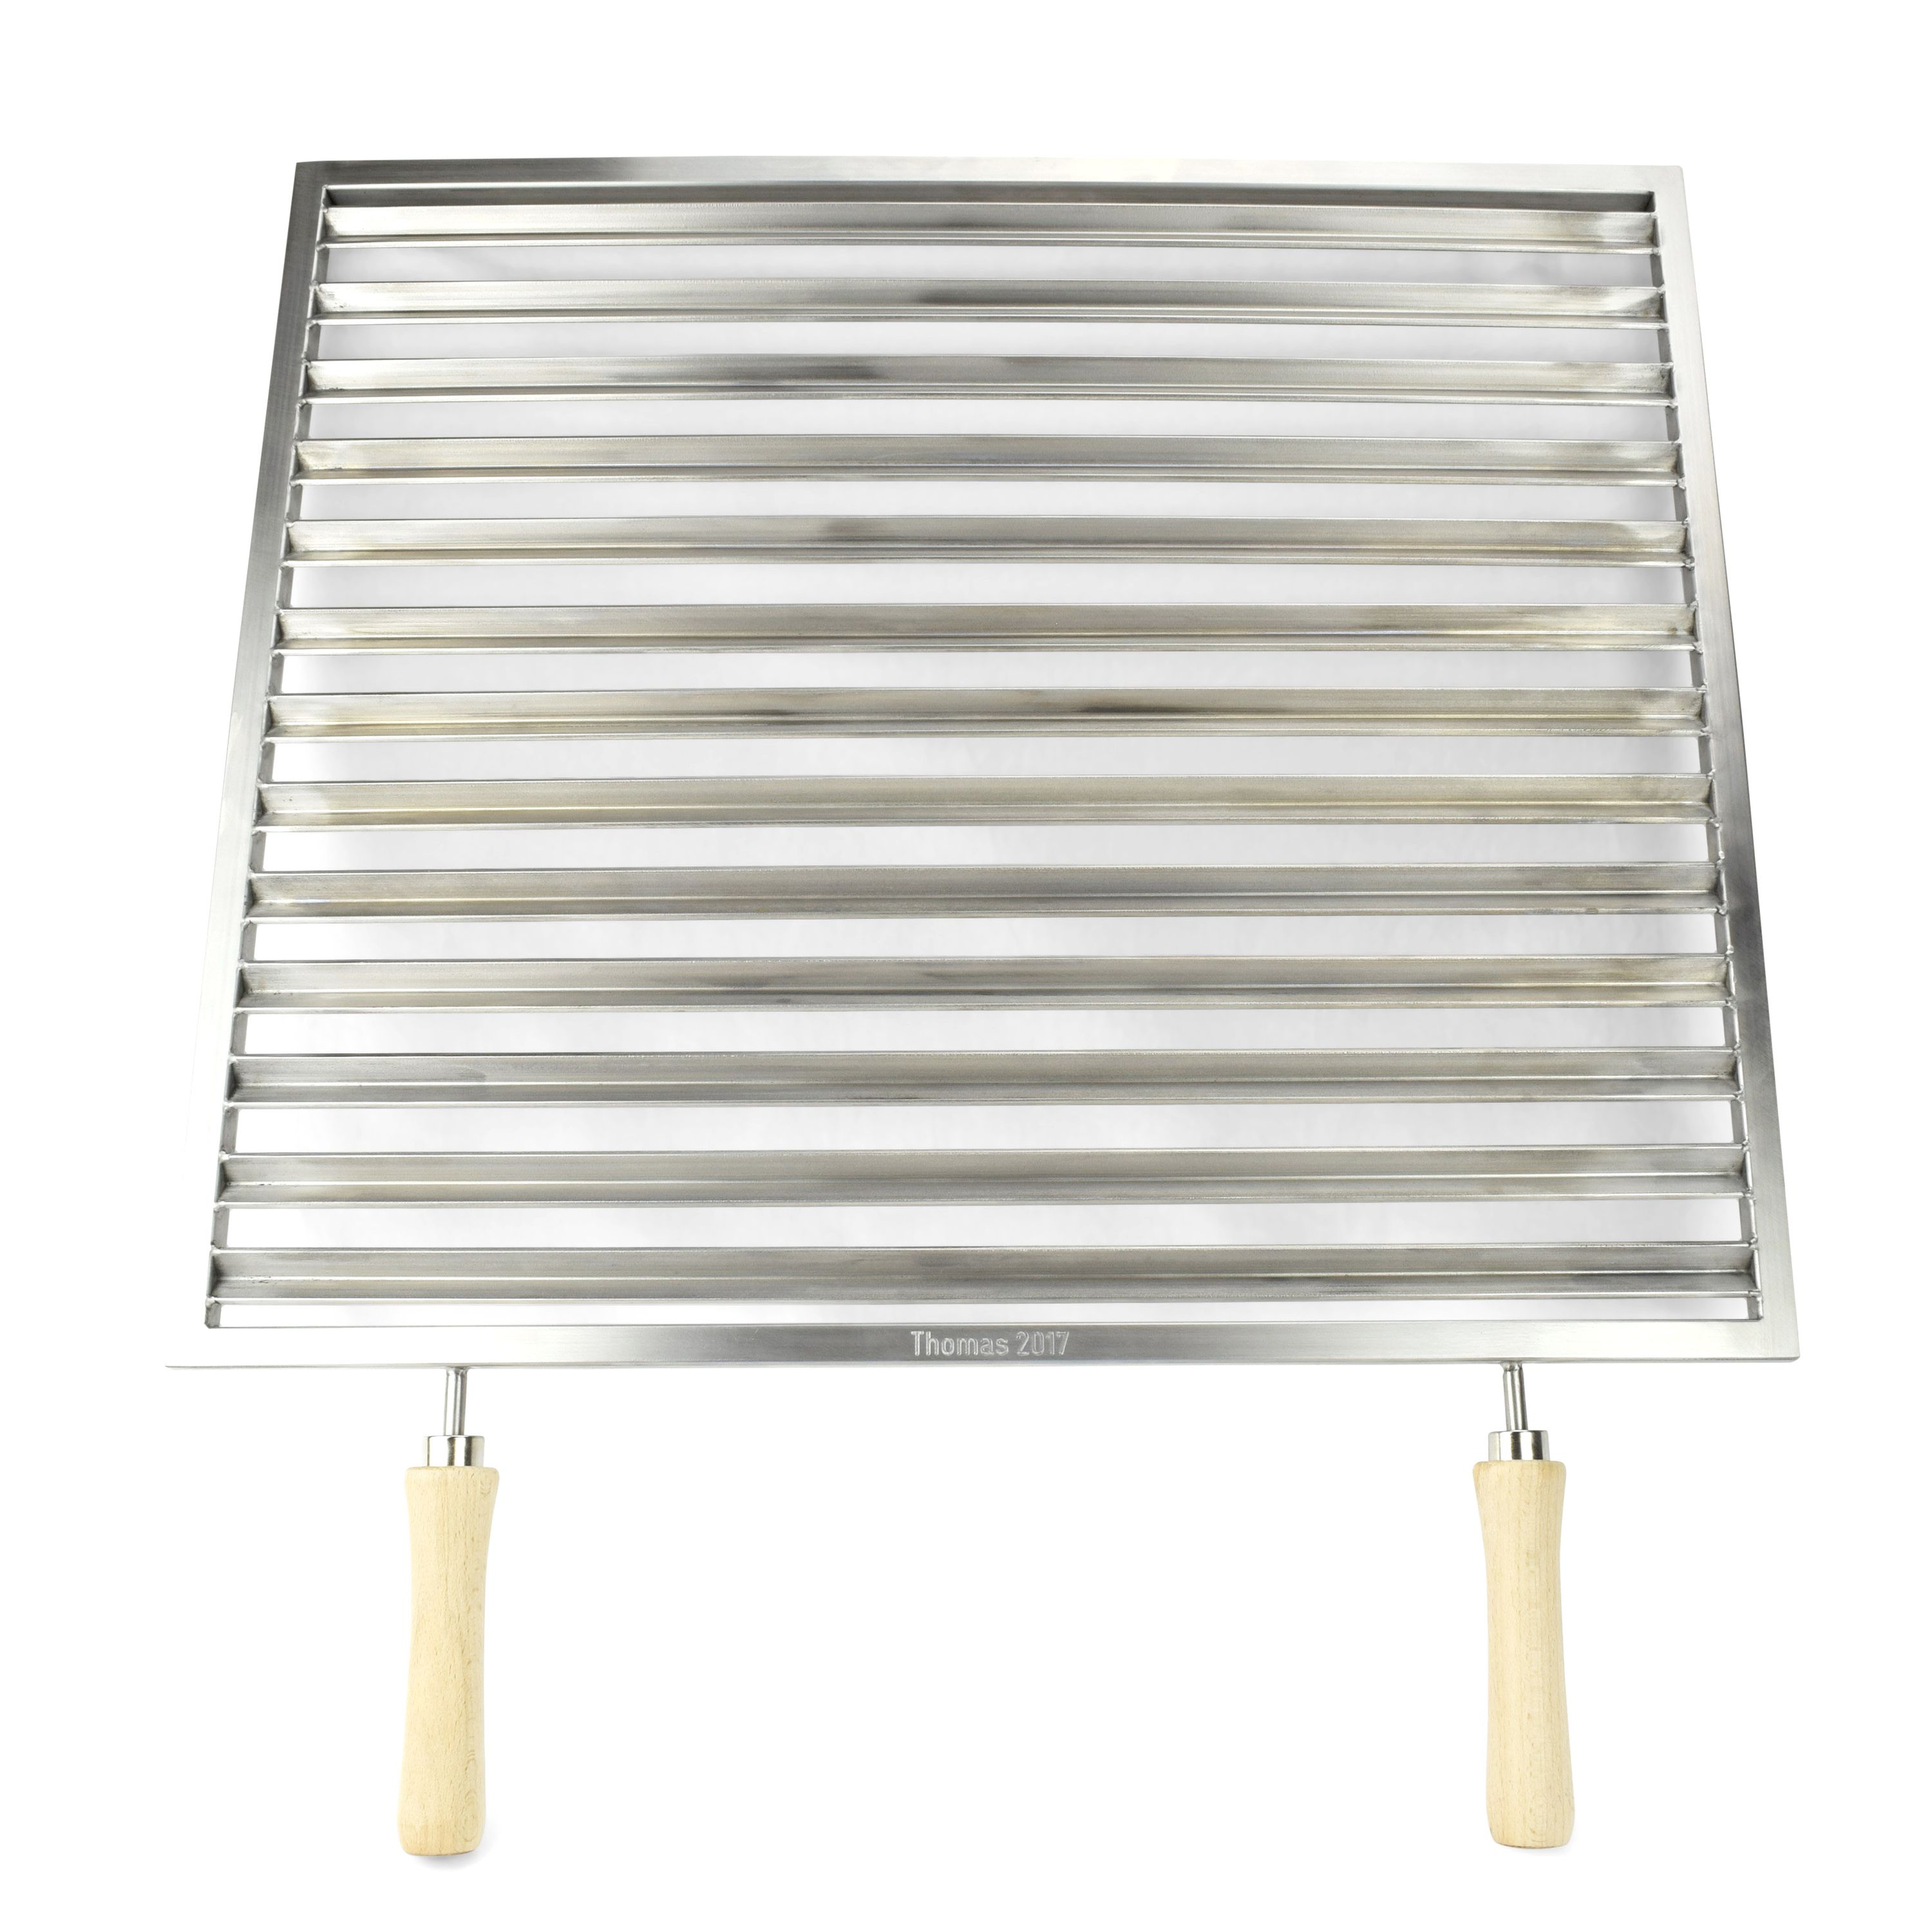 Barbecue grill made to measure ECKIG Model ARGENTINA in stainless steel